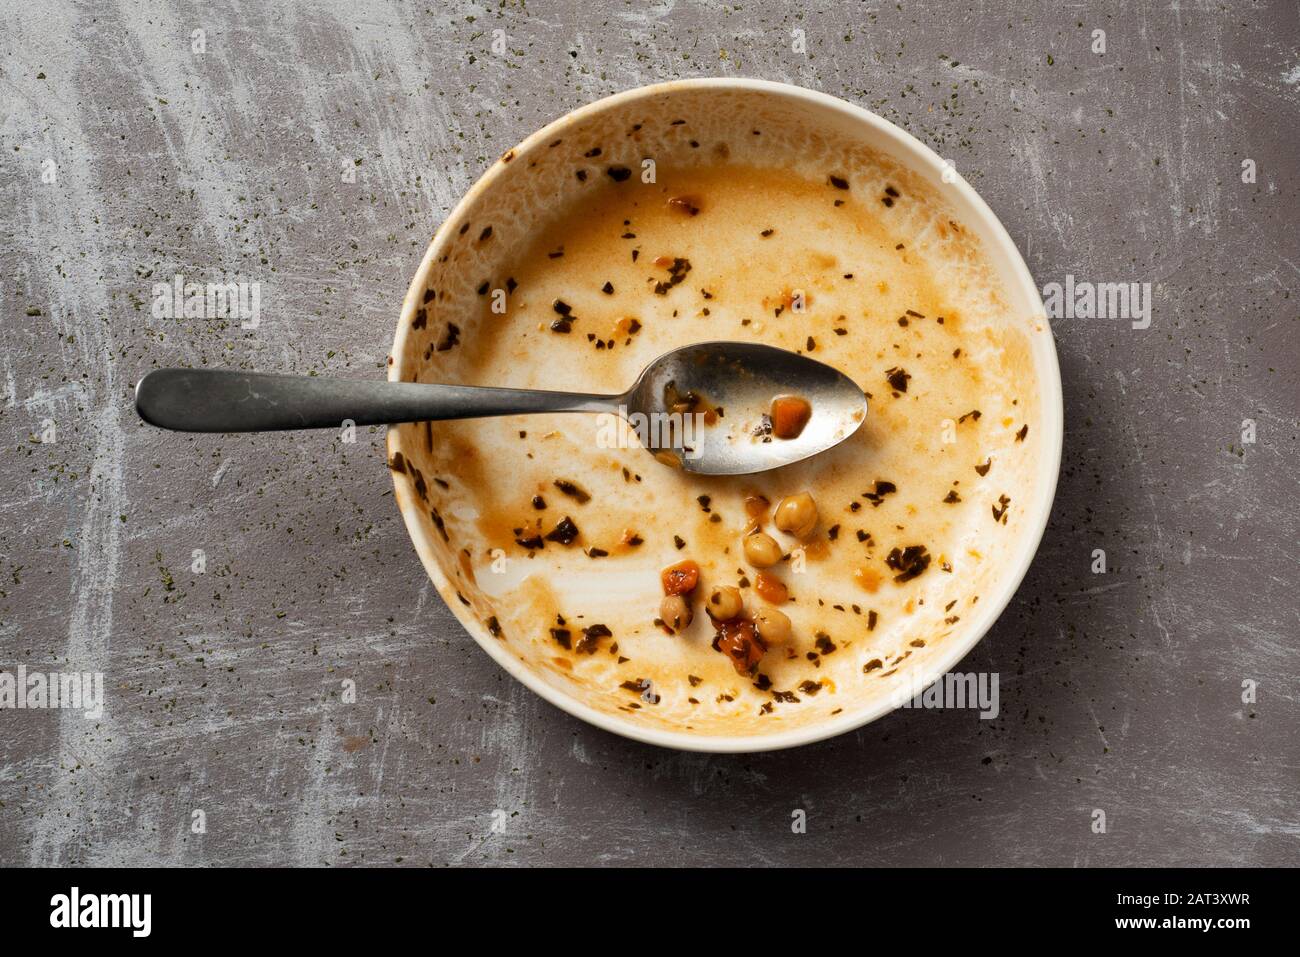 high angle view of a plate with the remains of a vegetarian chickpea stew on a rustic gray surface Stock Photo